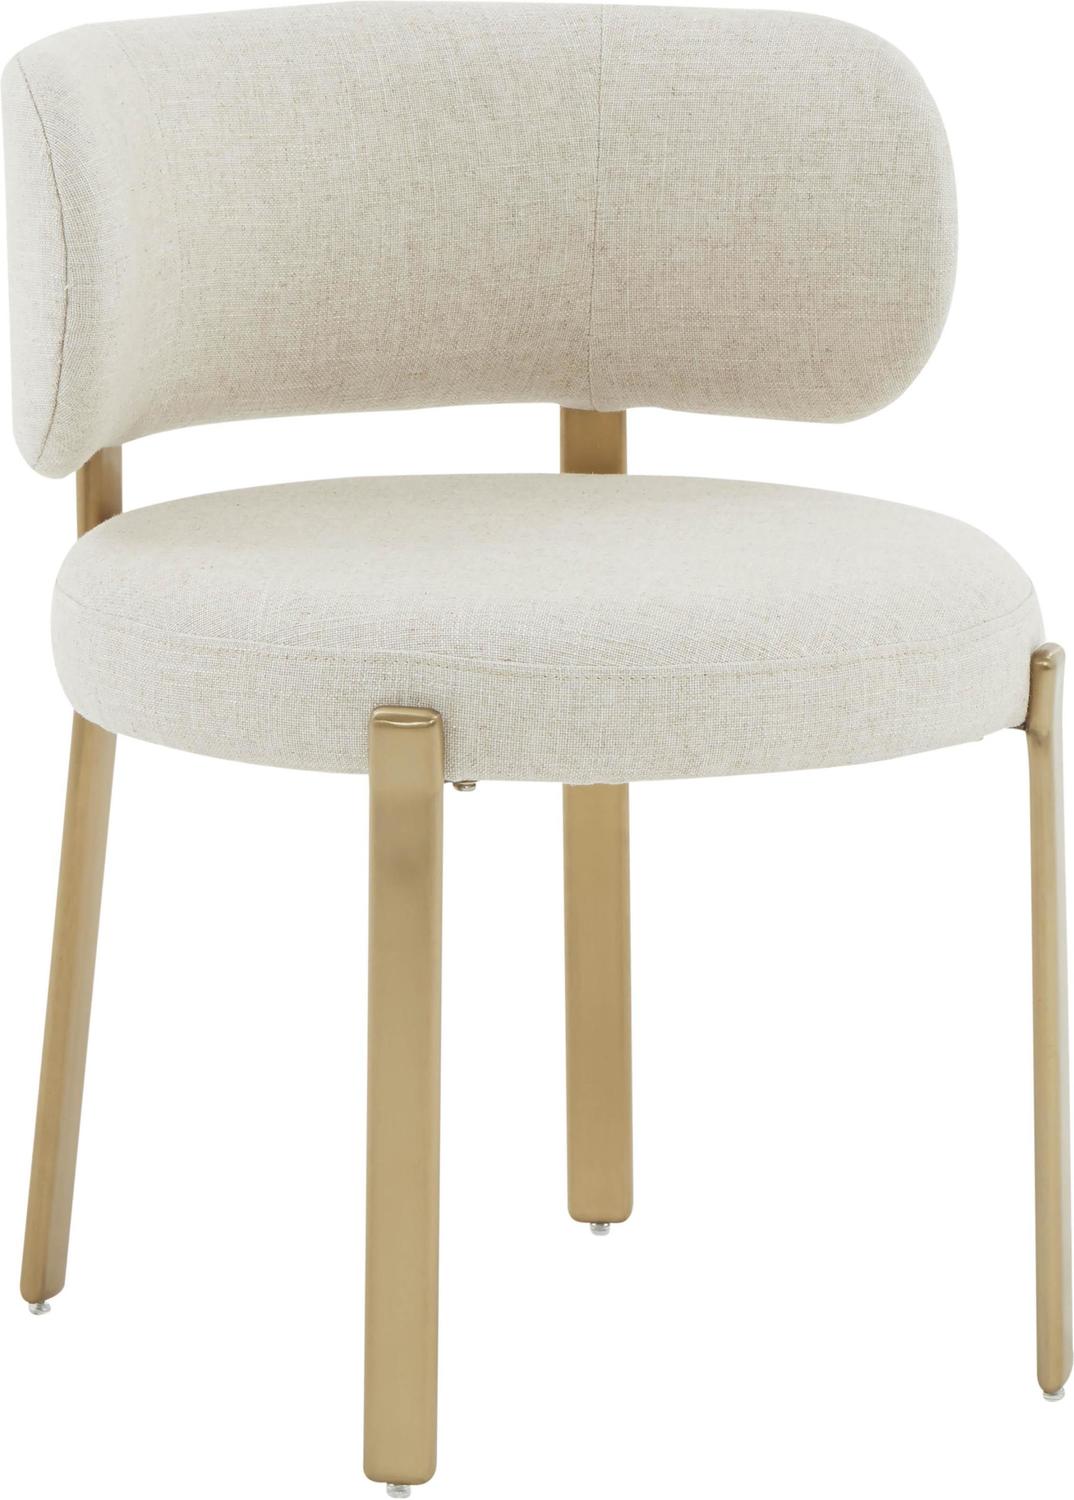 gray wood dining chairs Tov Furniture Dining Chairs Cream